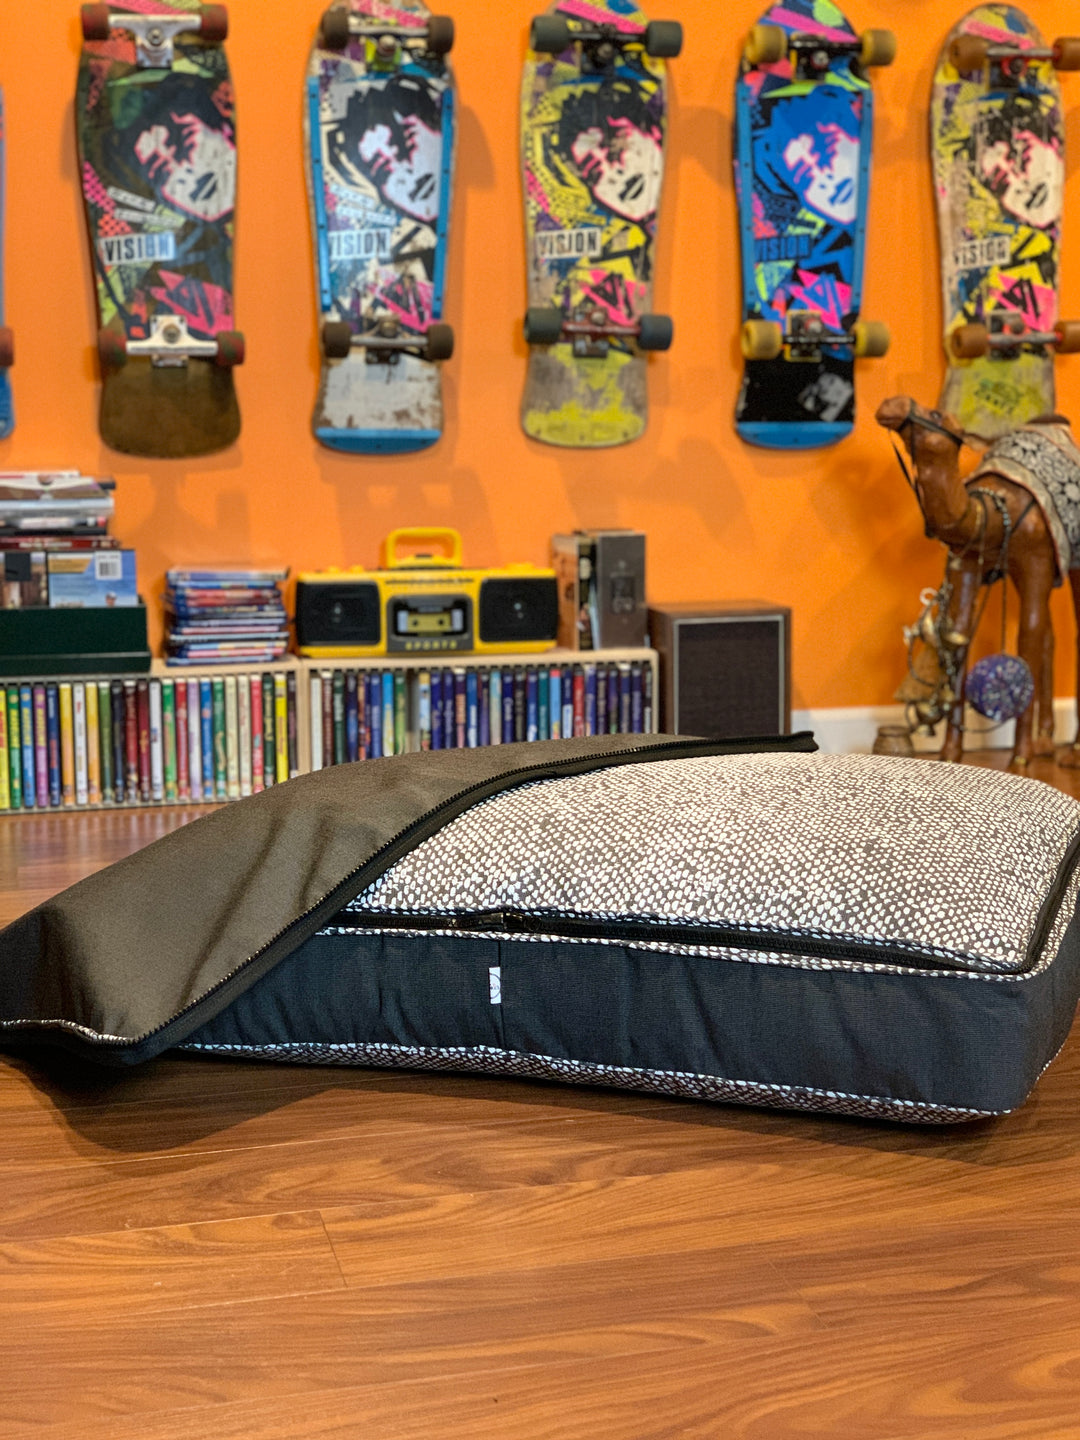 The Poochkies Custom Dog Beds with Zip-off Tops sold at Mustkies